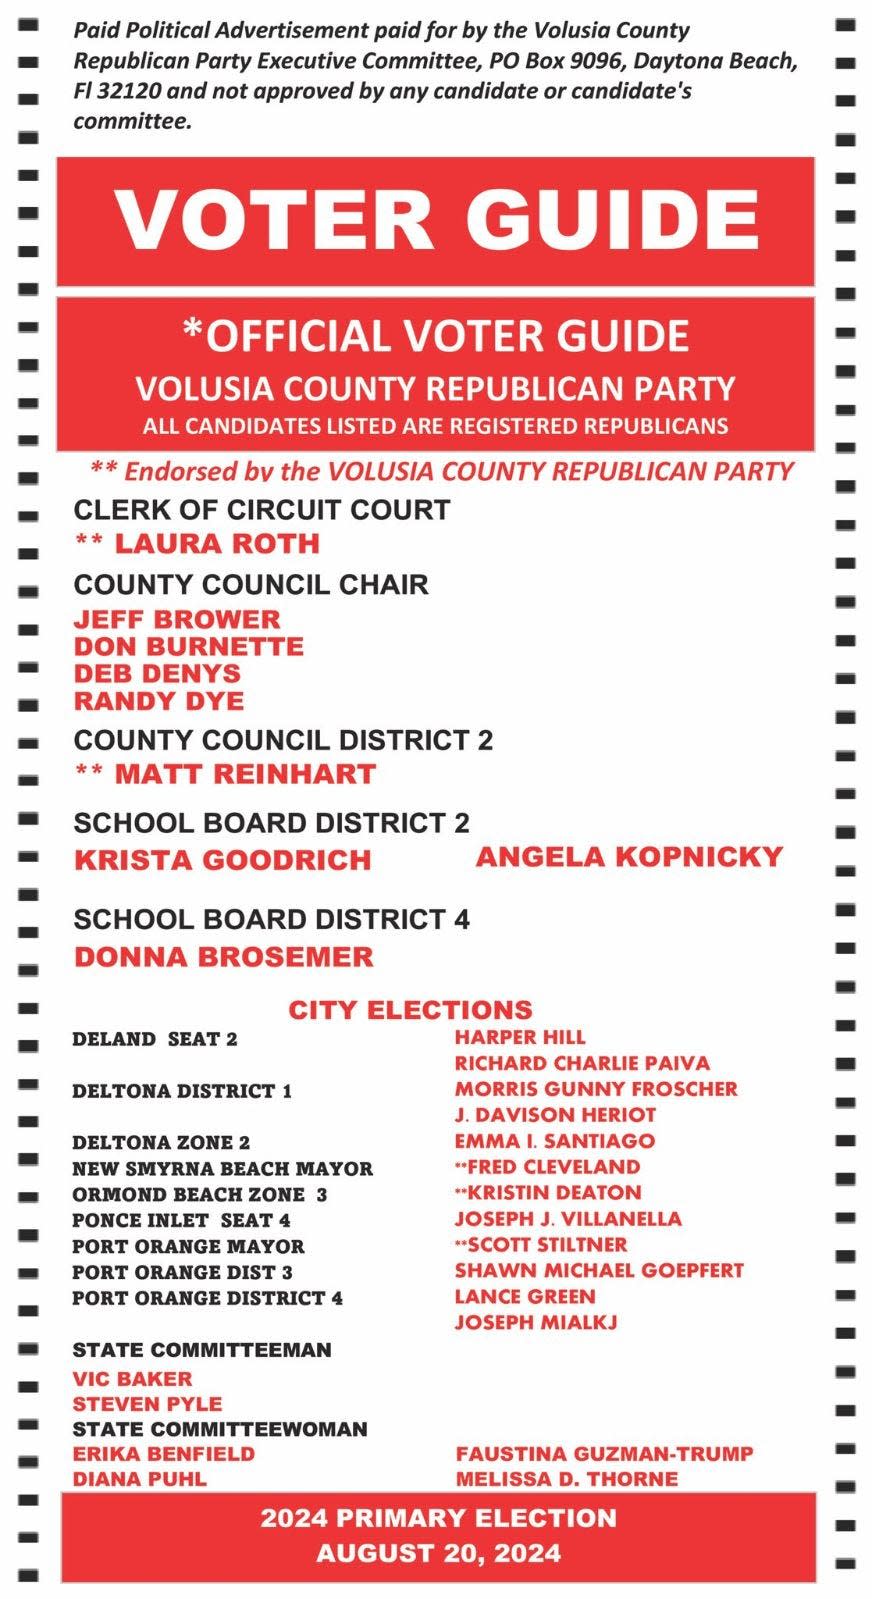 Volusia County Republican Party Official Voter Guide